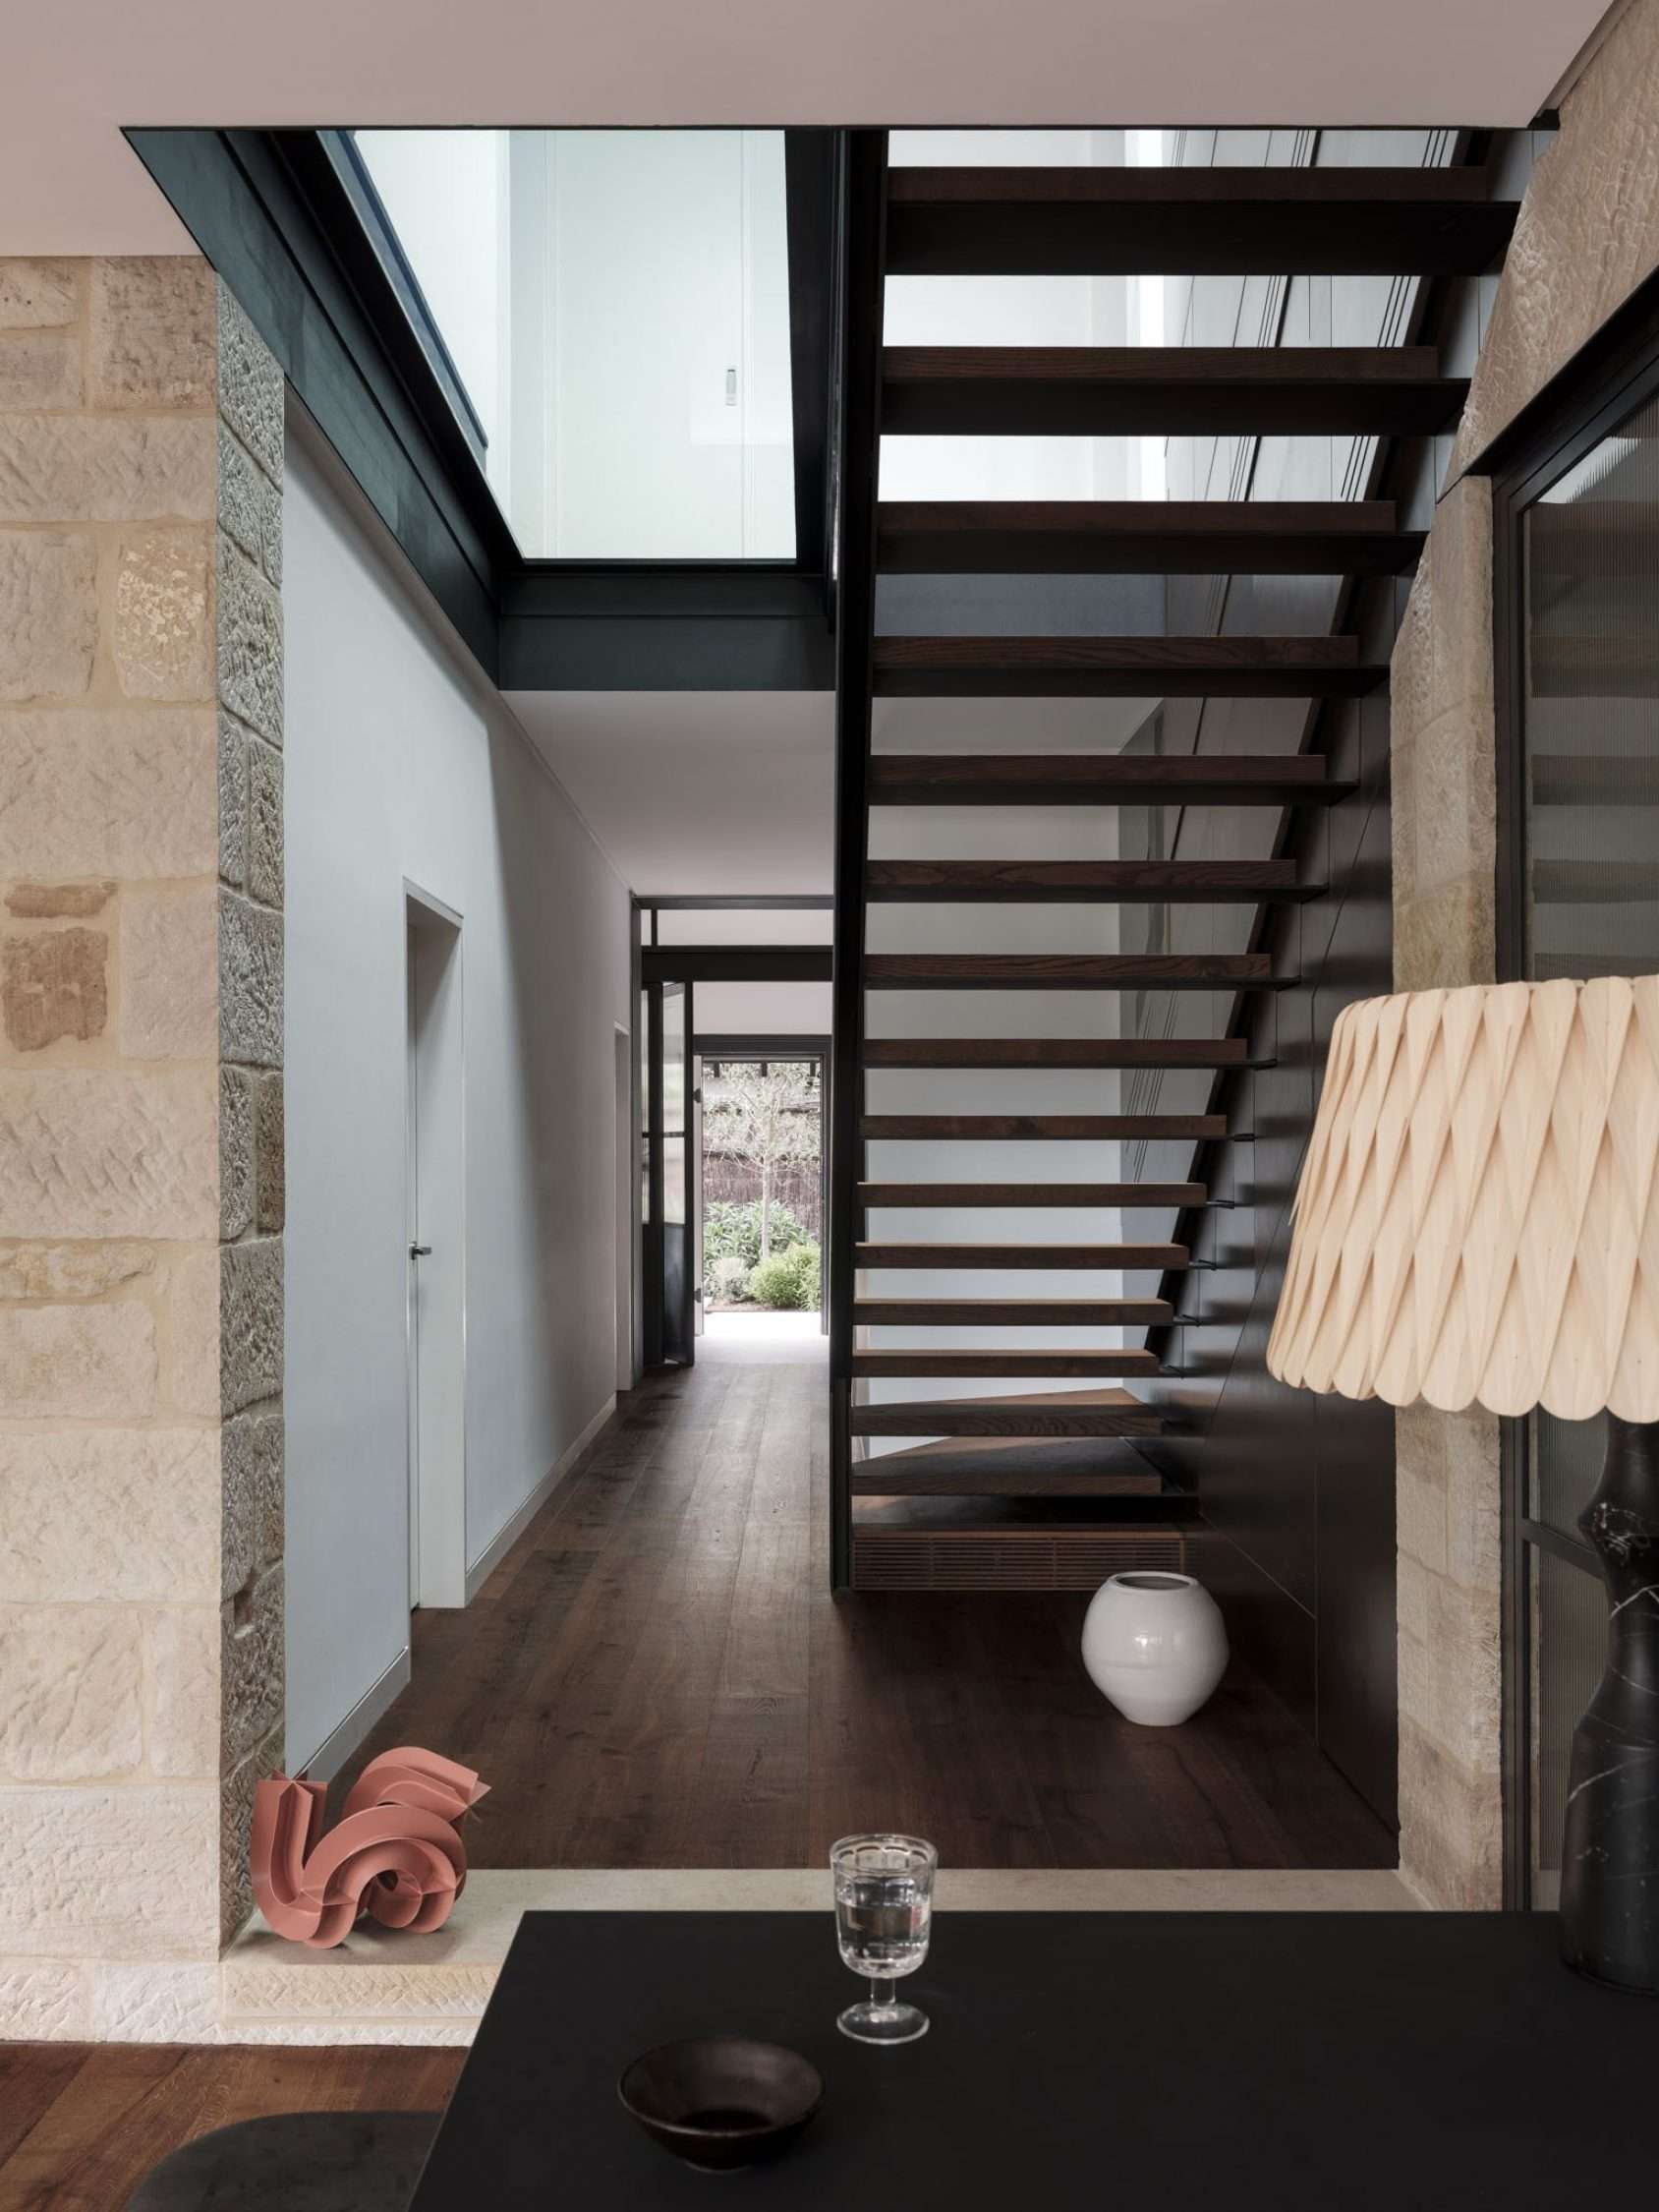 Maranatha House by BIJL Architecture showing the hallway and feature staircase